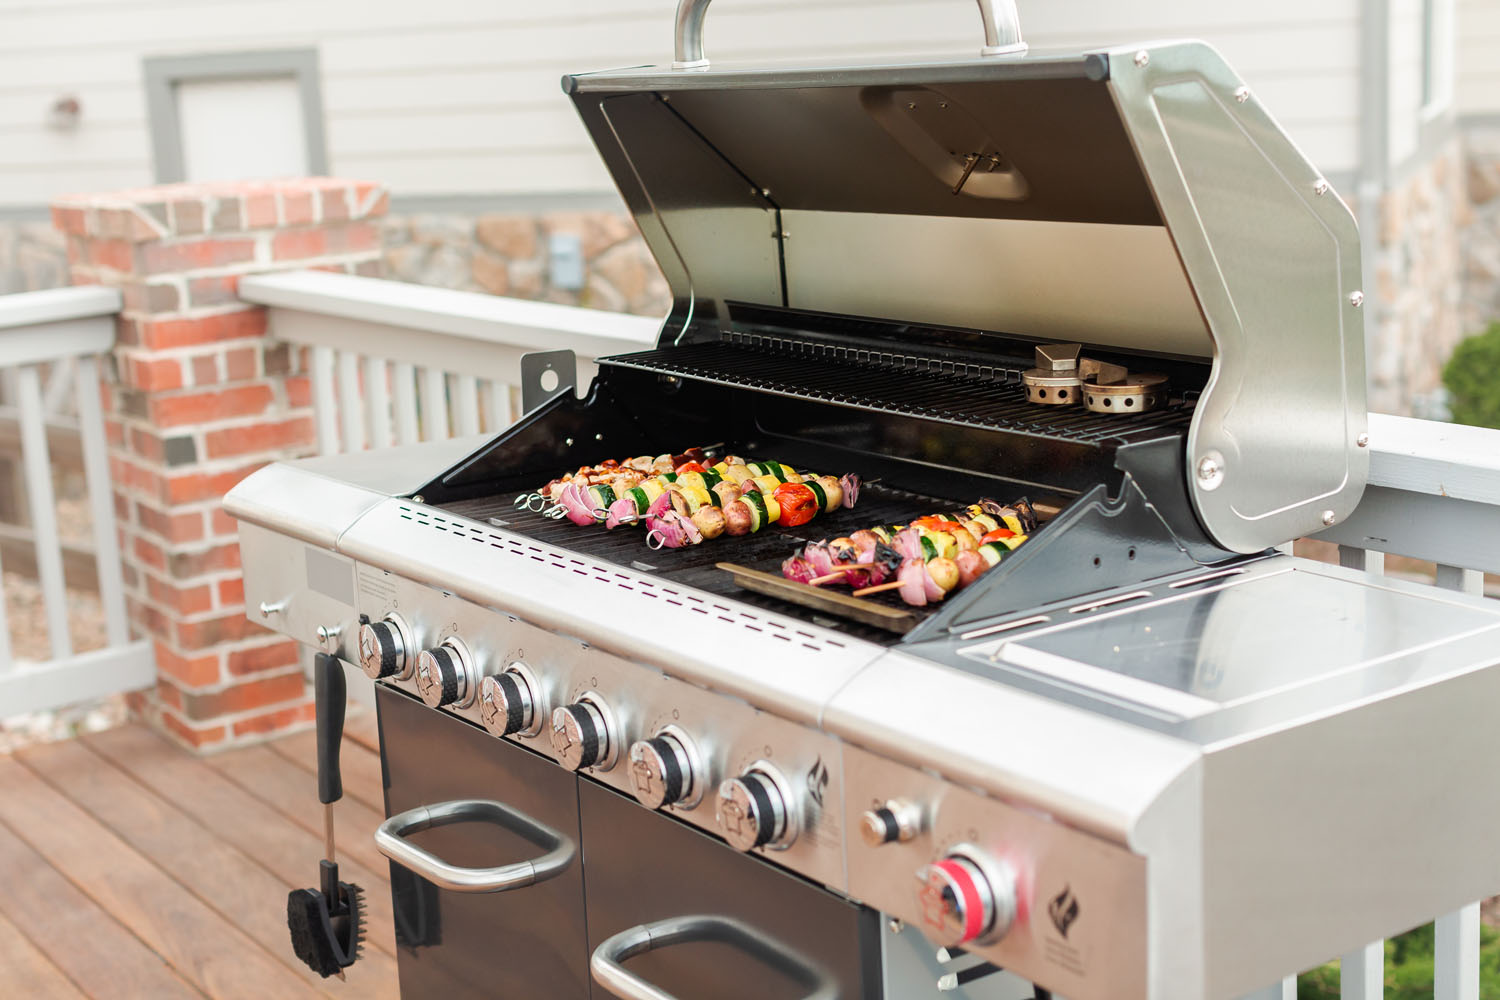 Grilling for Beginners The Essentials of Using Gas or Propane